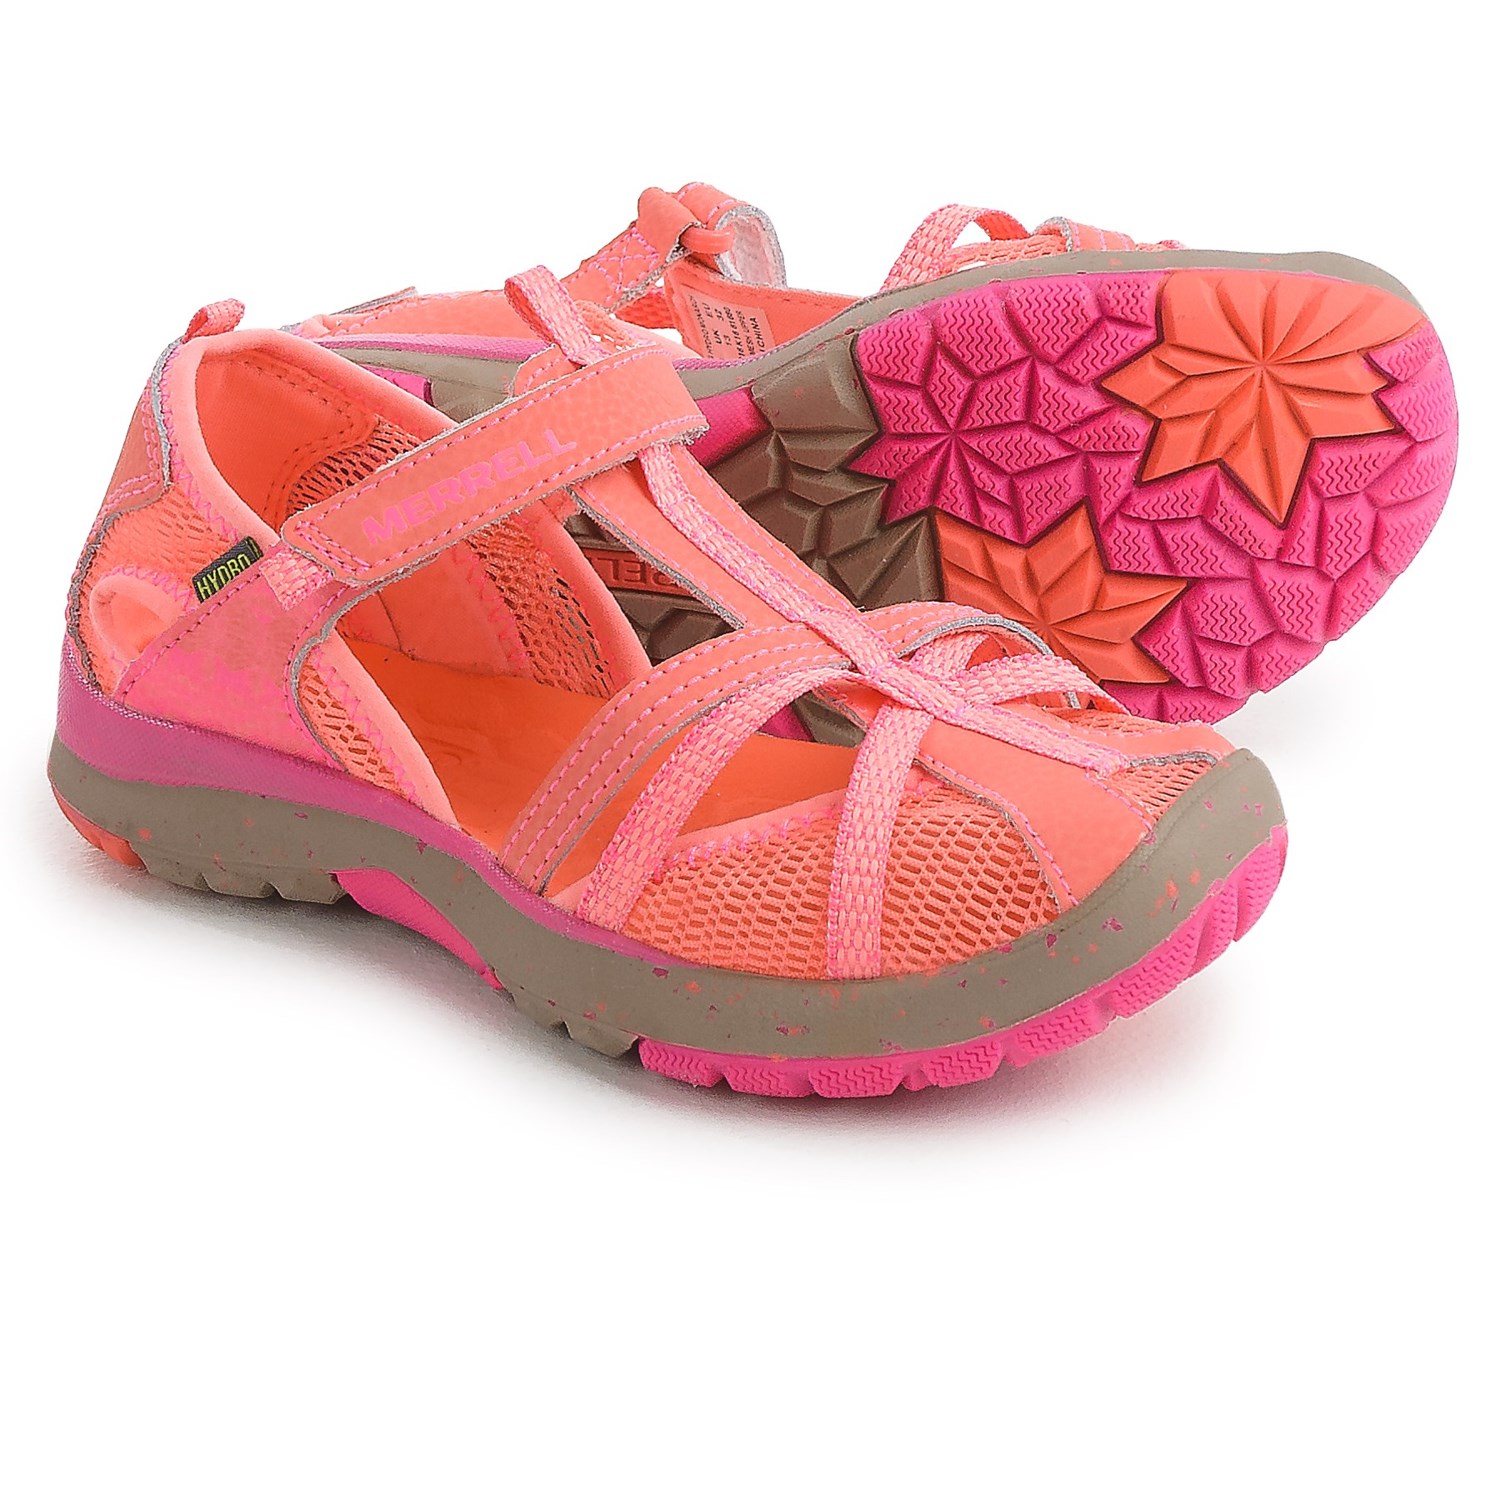 Merrell Hydro Monarch Sandals (For Little and Big Girls) - Save 60%